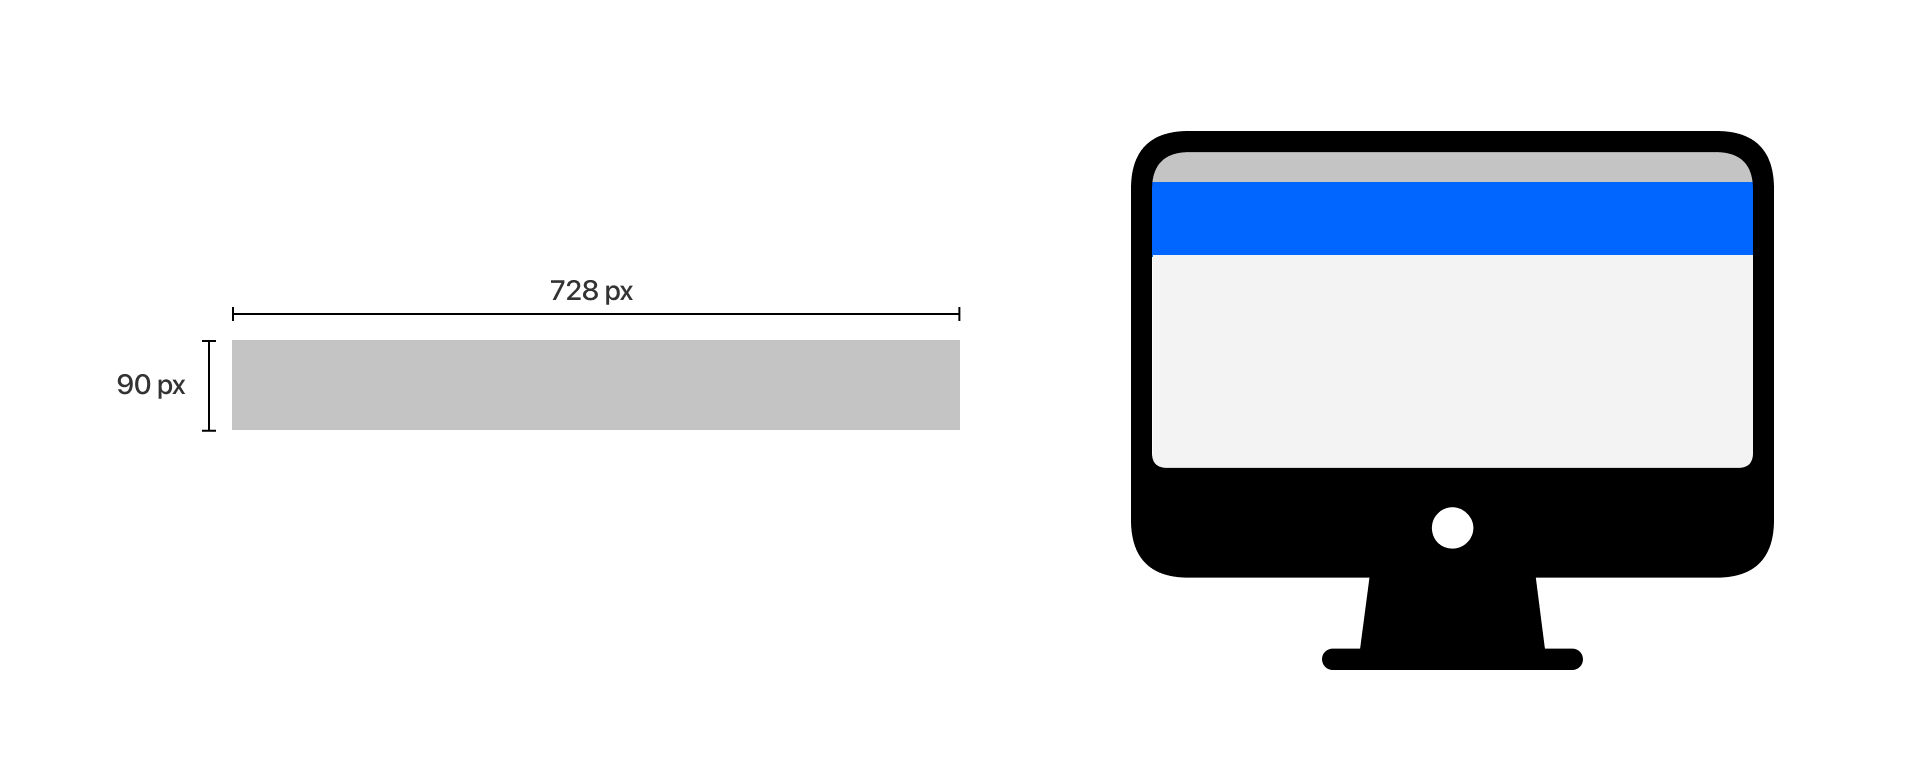 Illustration of a gray banner, measuring 728 by 90 pixels, next to a desktop monitor displaying a blue and white screen